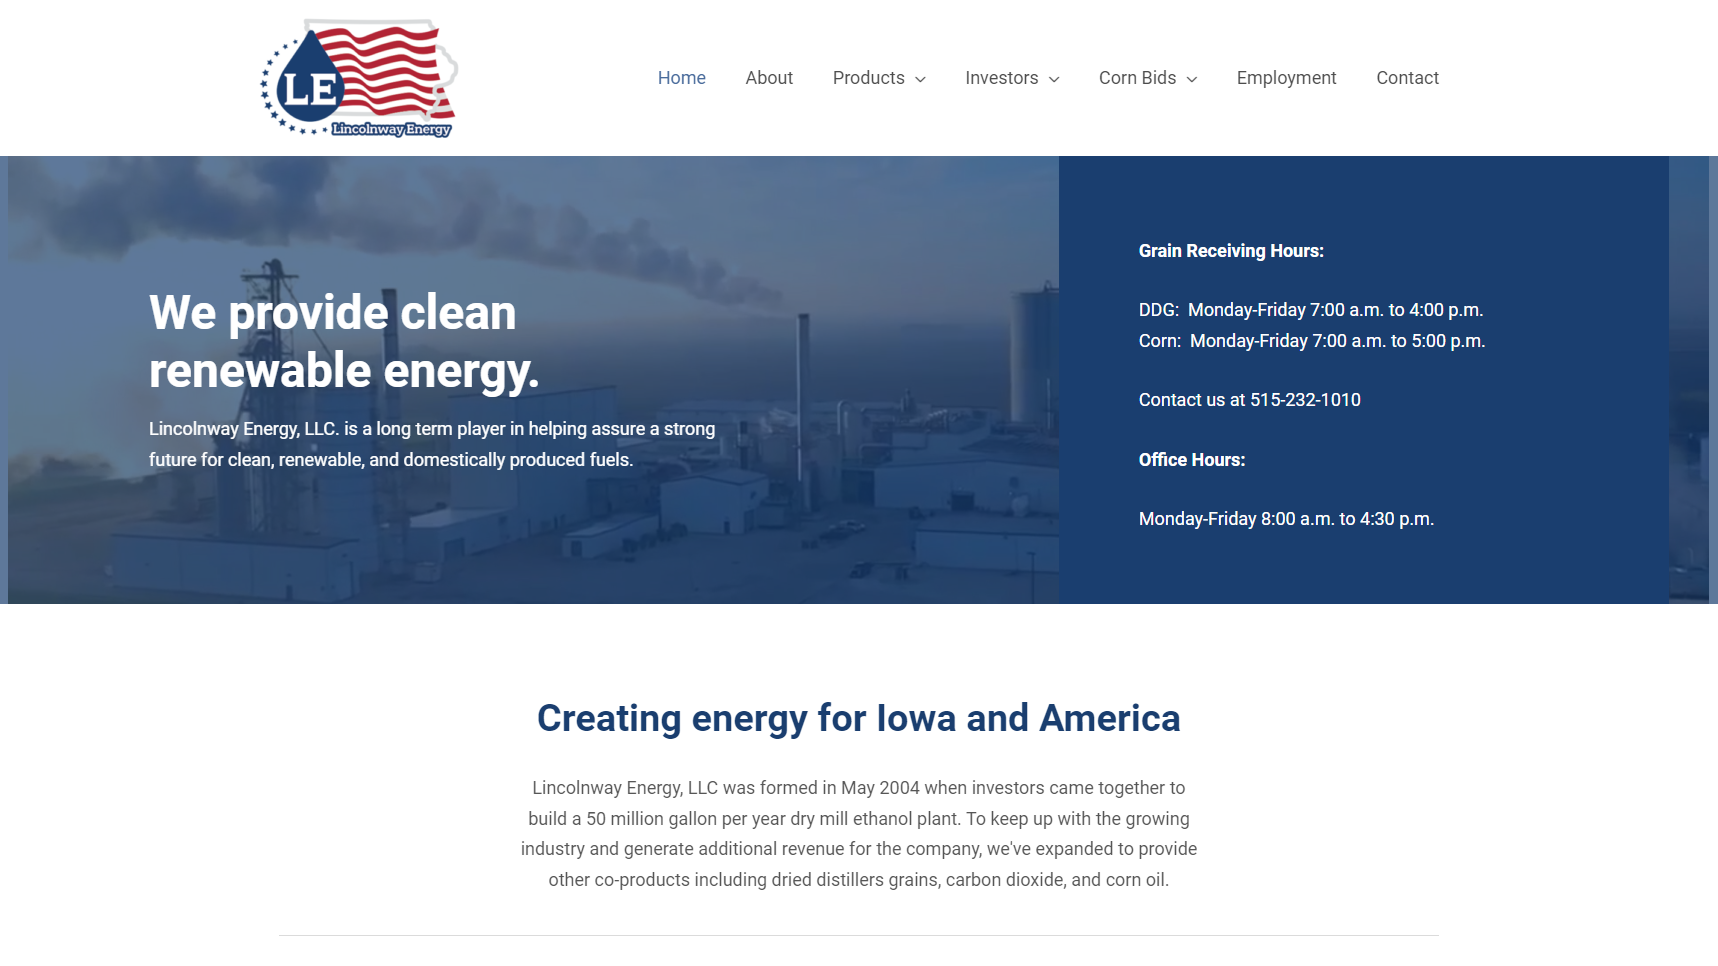 Lincolnway Energy - Ethanol Production Plant Manufacturer